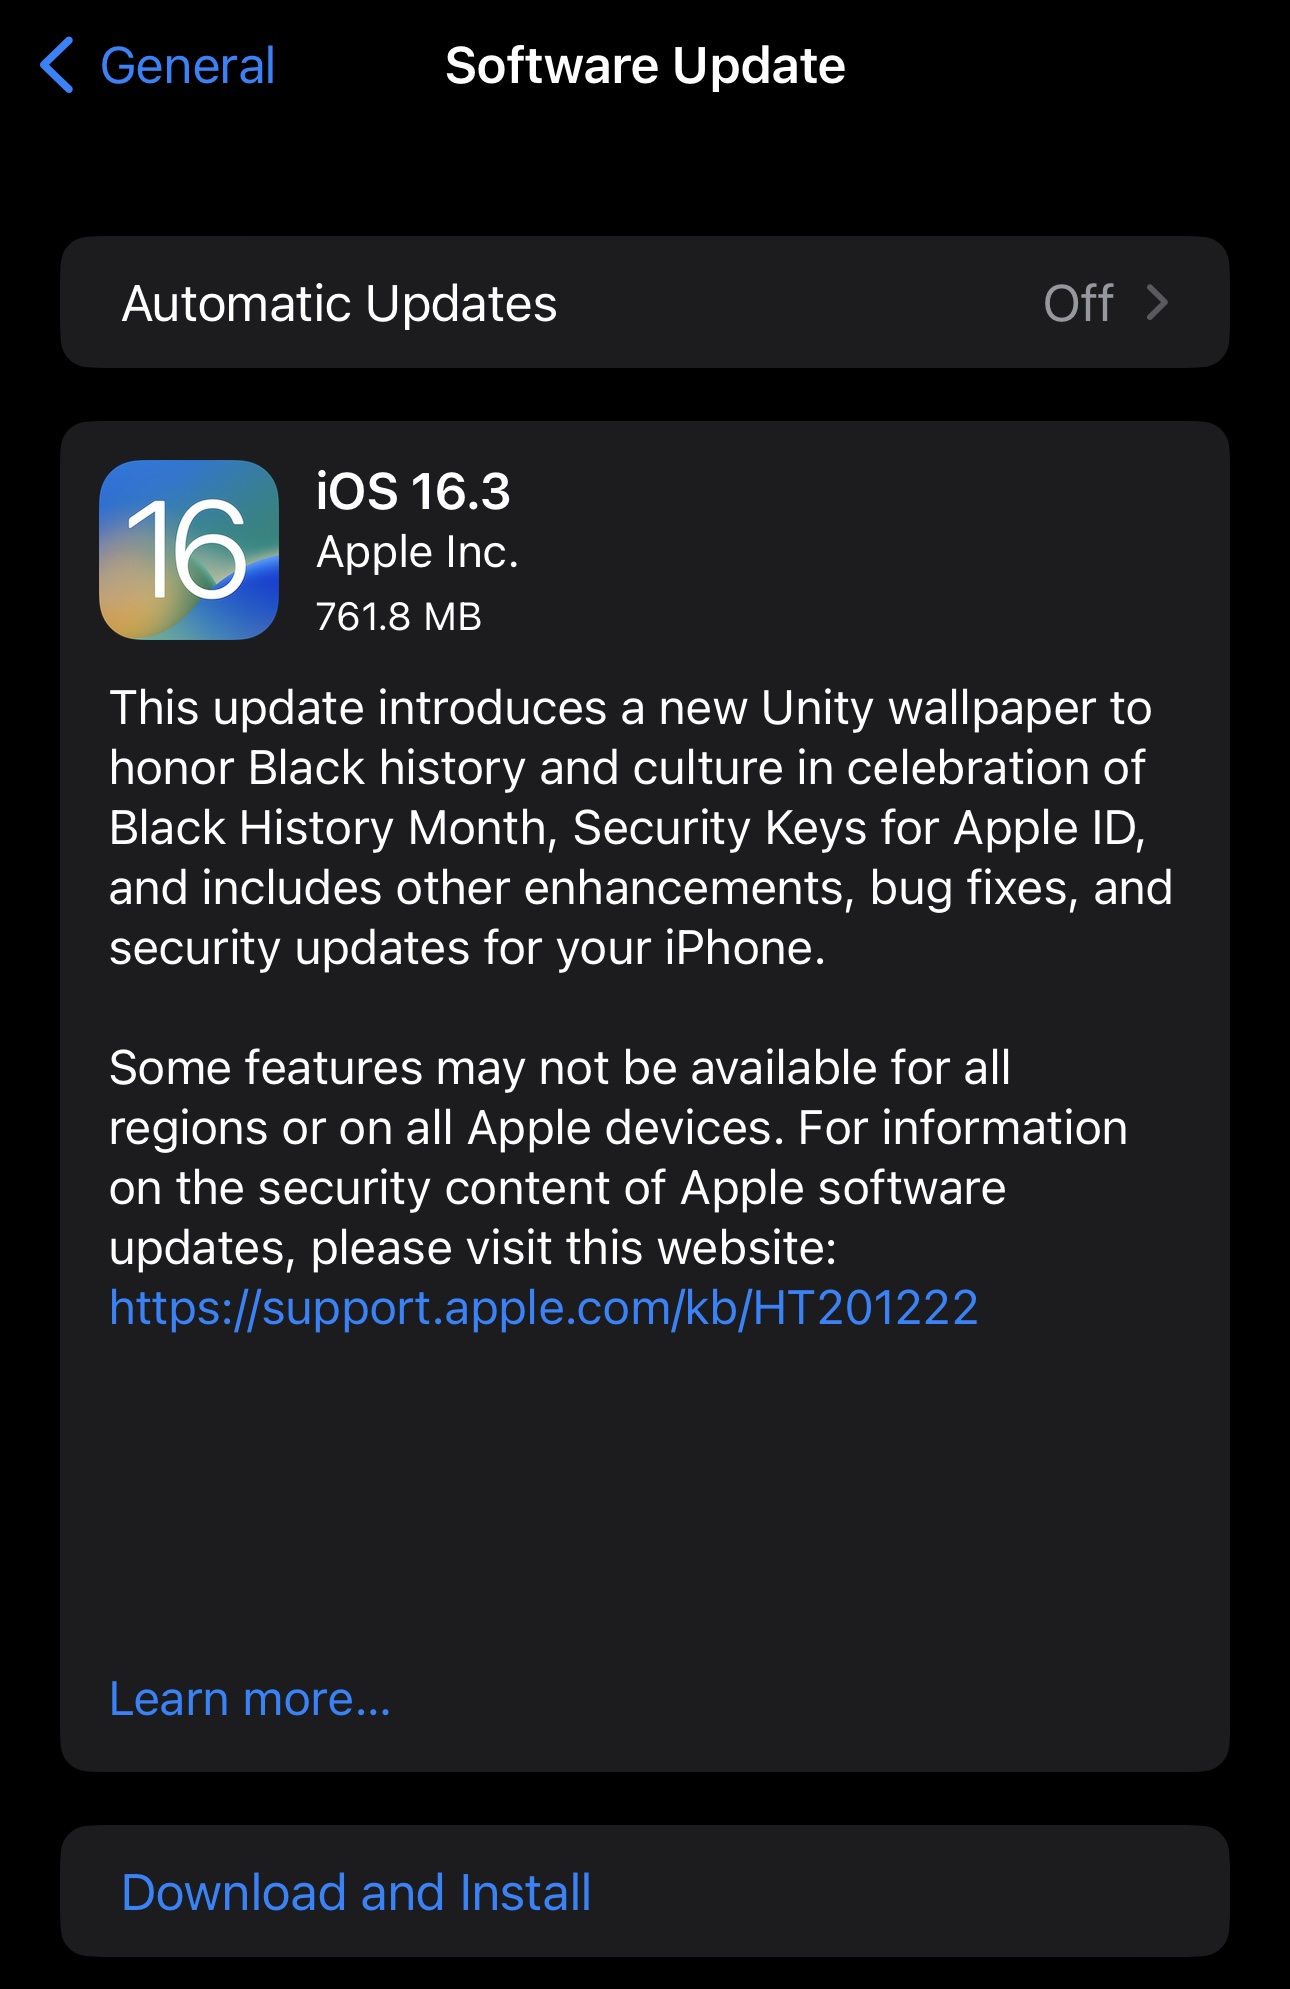 The iOS 16.3 Software Update.